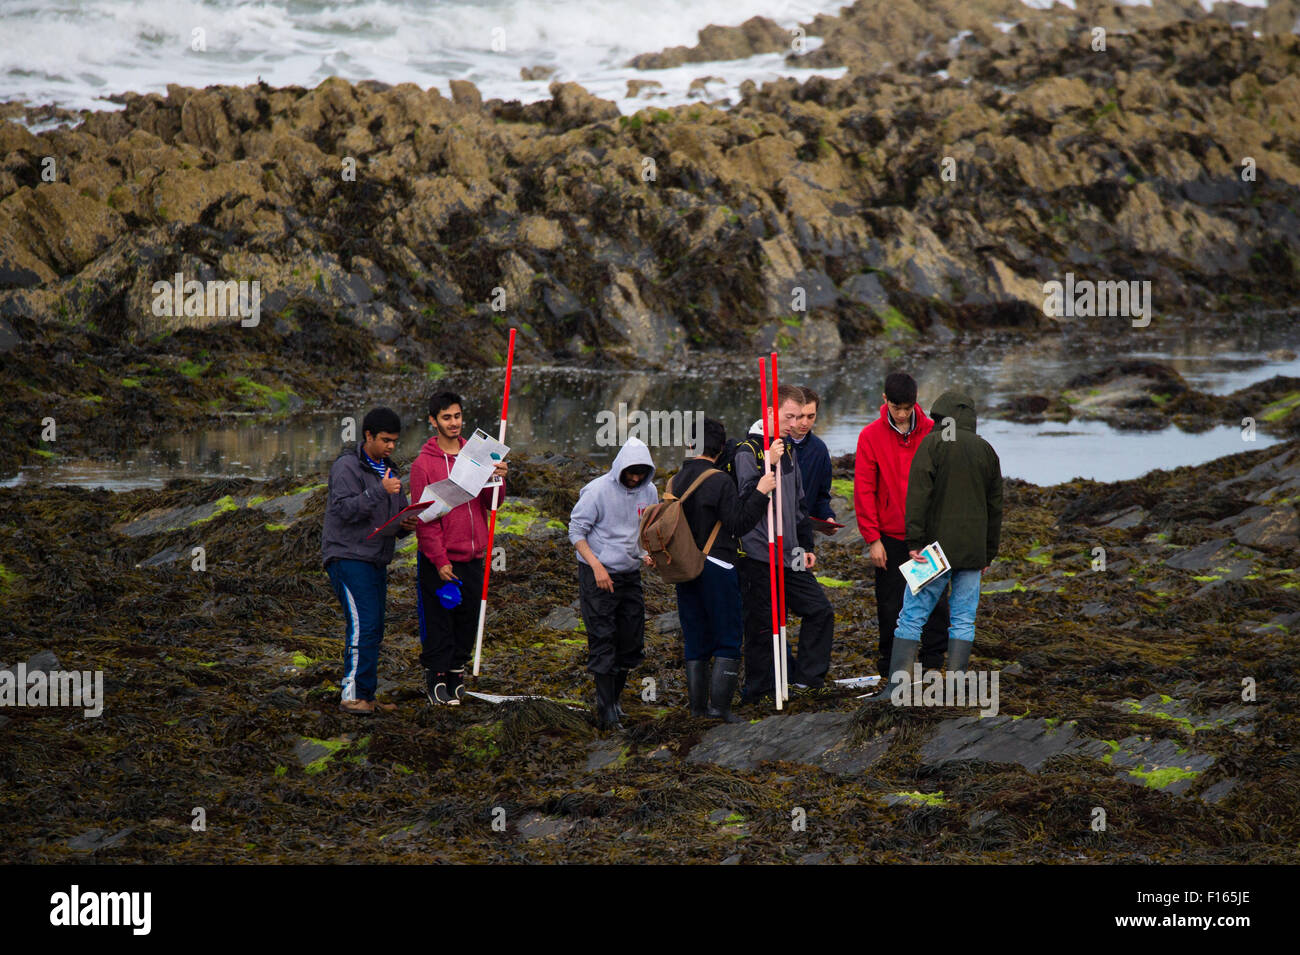 A group of young adult men teenage boys college or 6th form students  holding red and white marker poles on an educational field trip studying the marine biology on the seashore rocks in Aberystwyth Wales UK Stock Photo